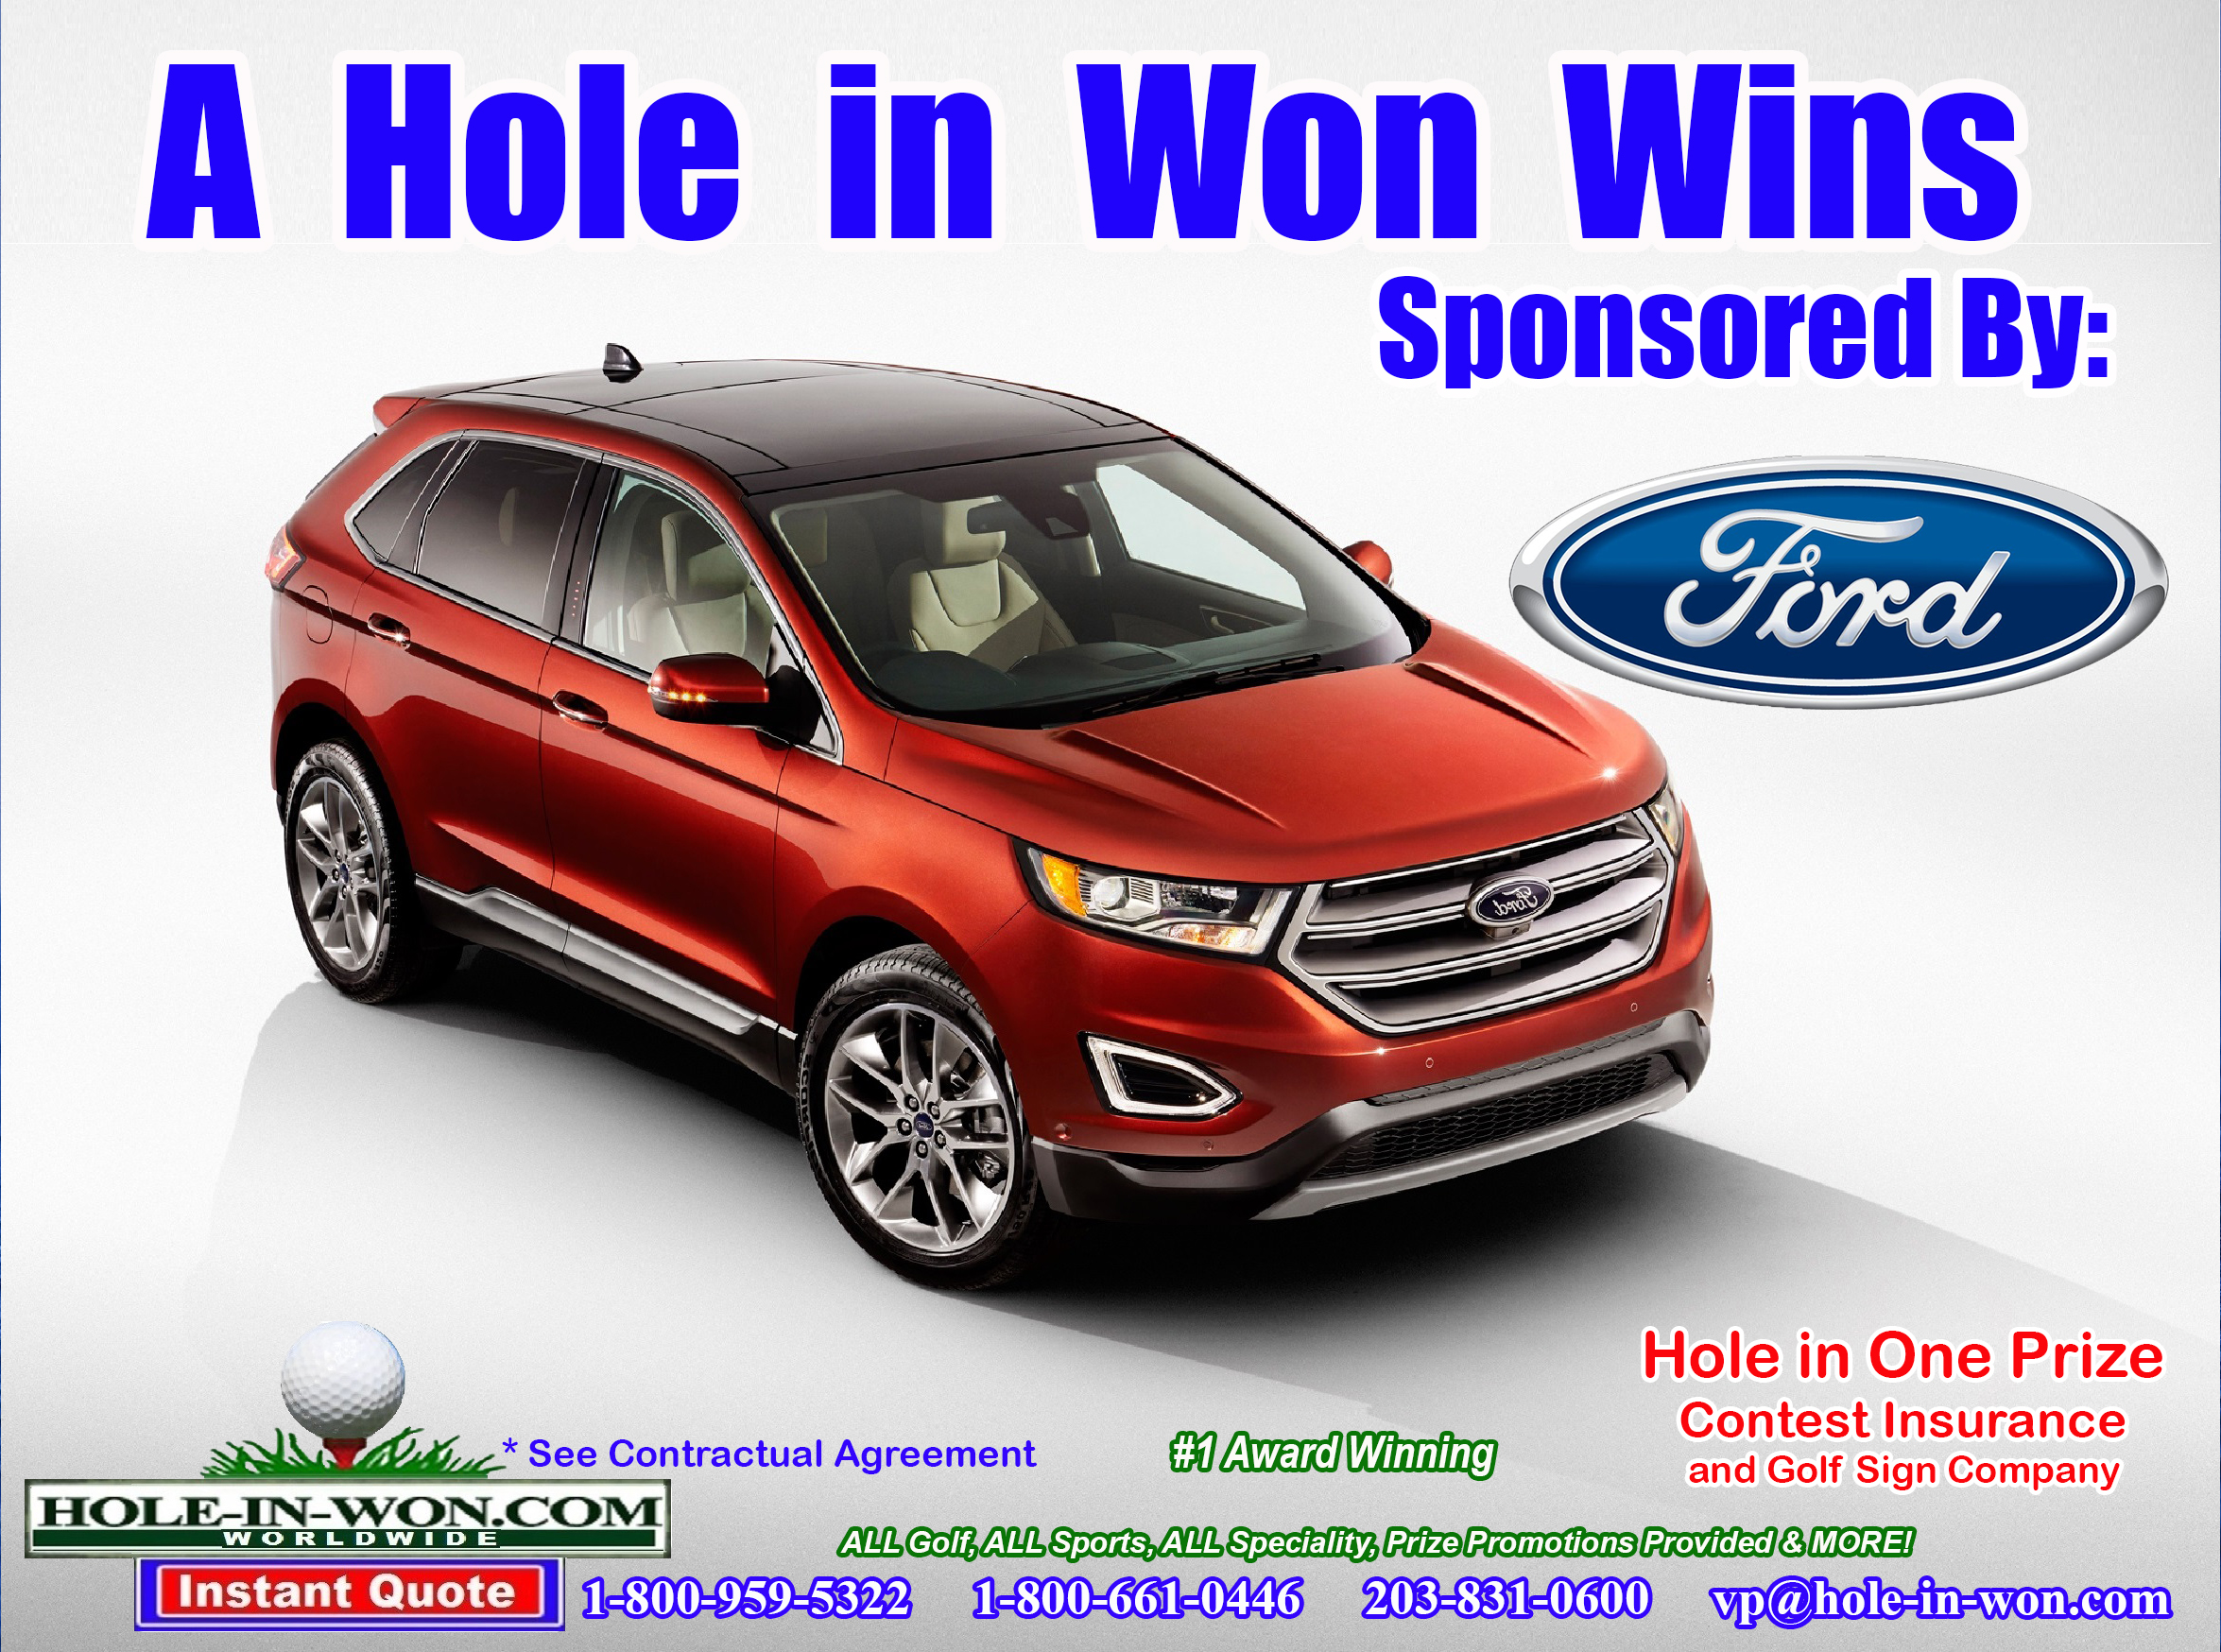 Ford hole in one program #2